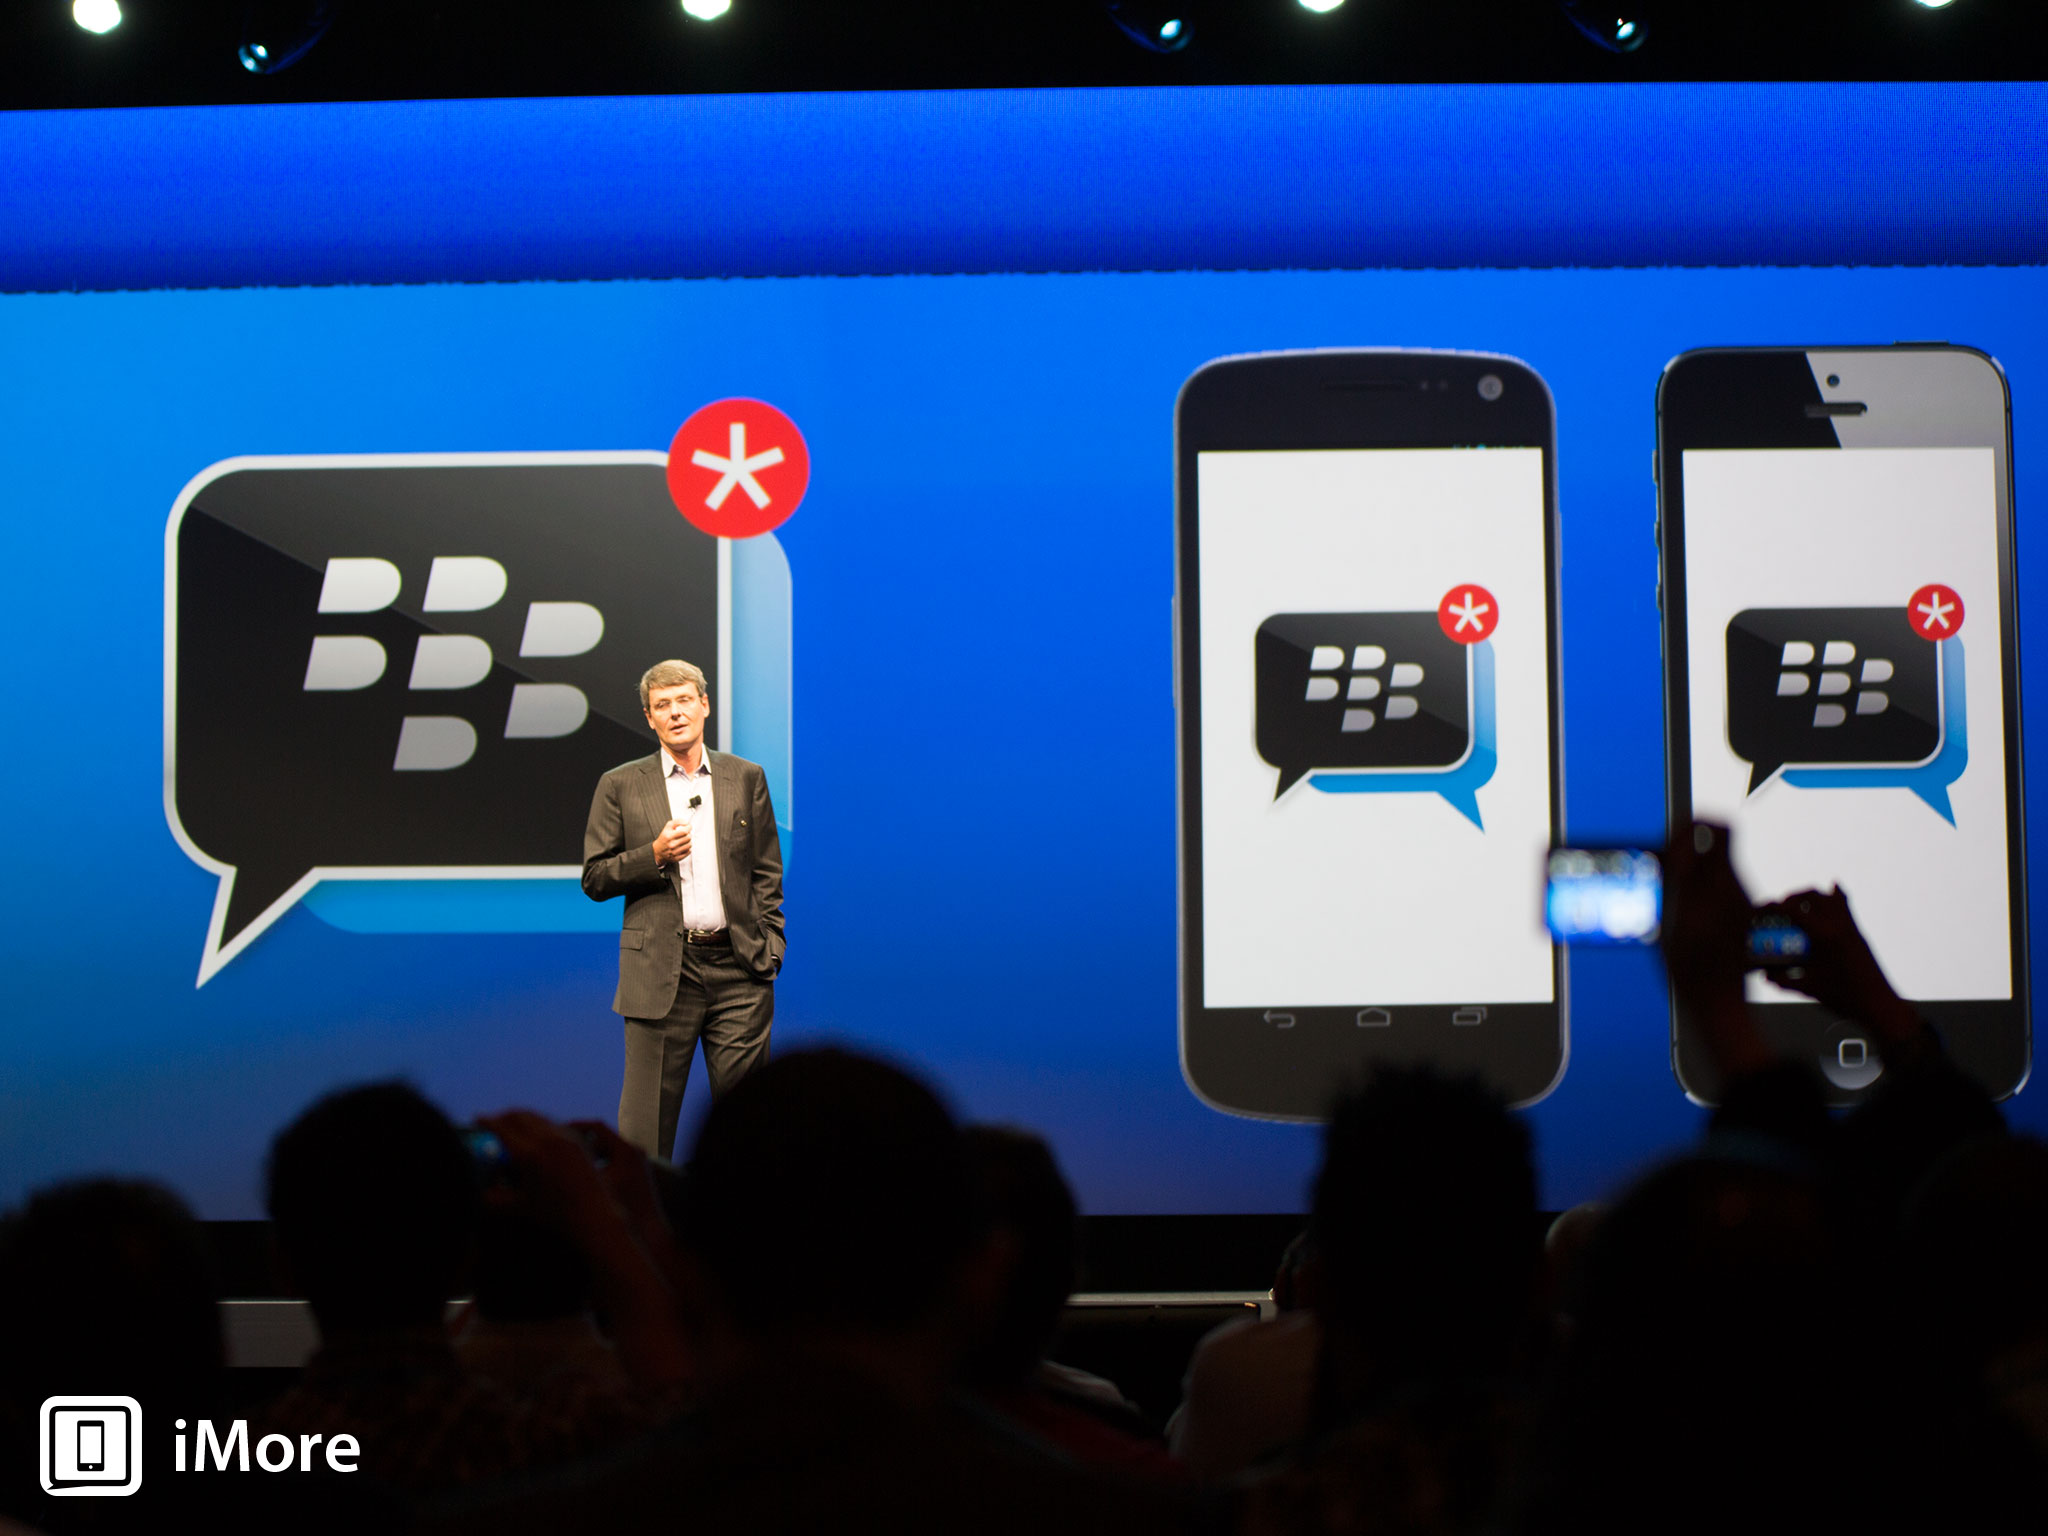 BlackBerry Messaging (BBM) coming to iOS this summer